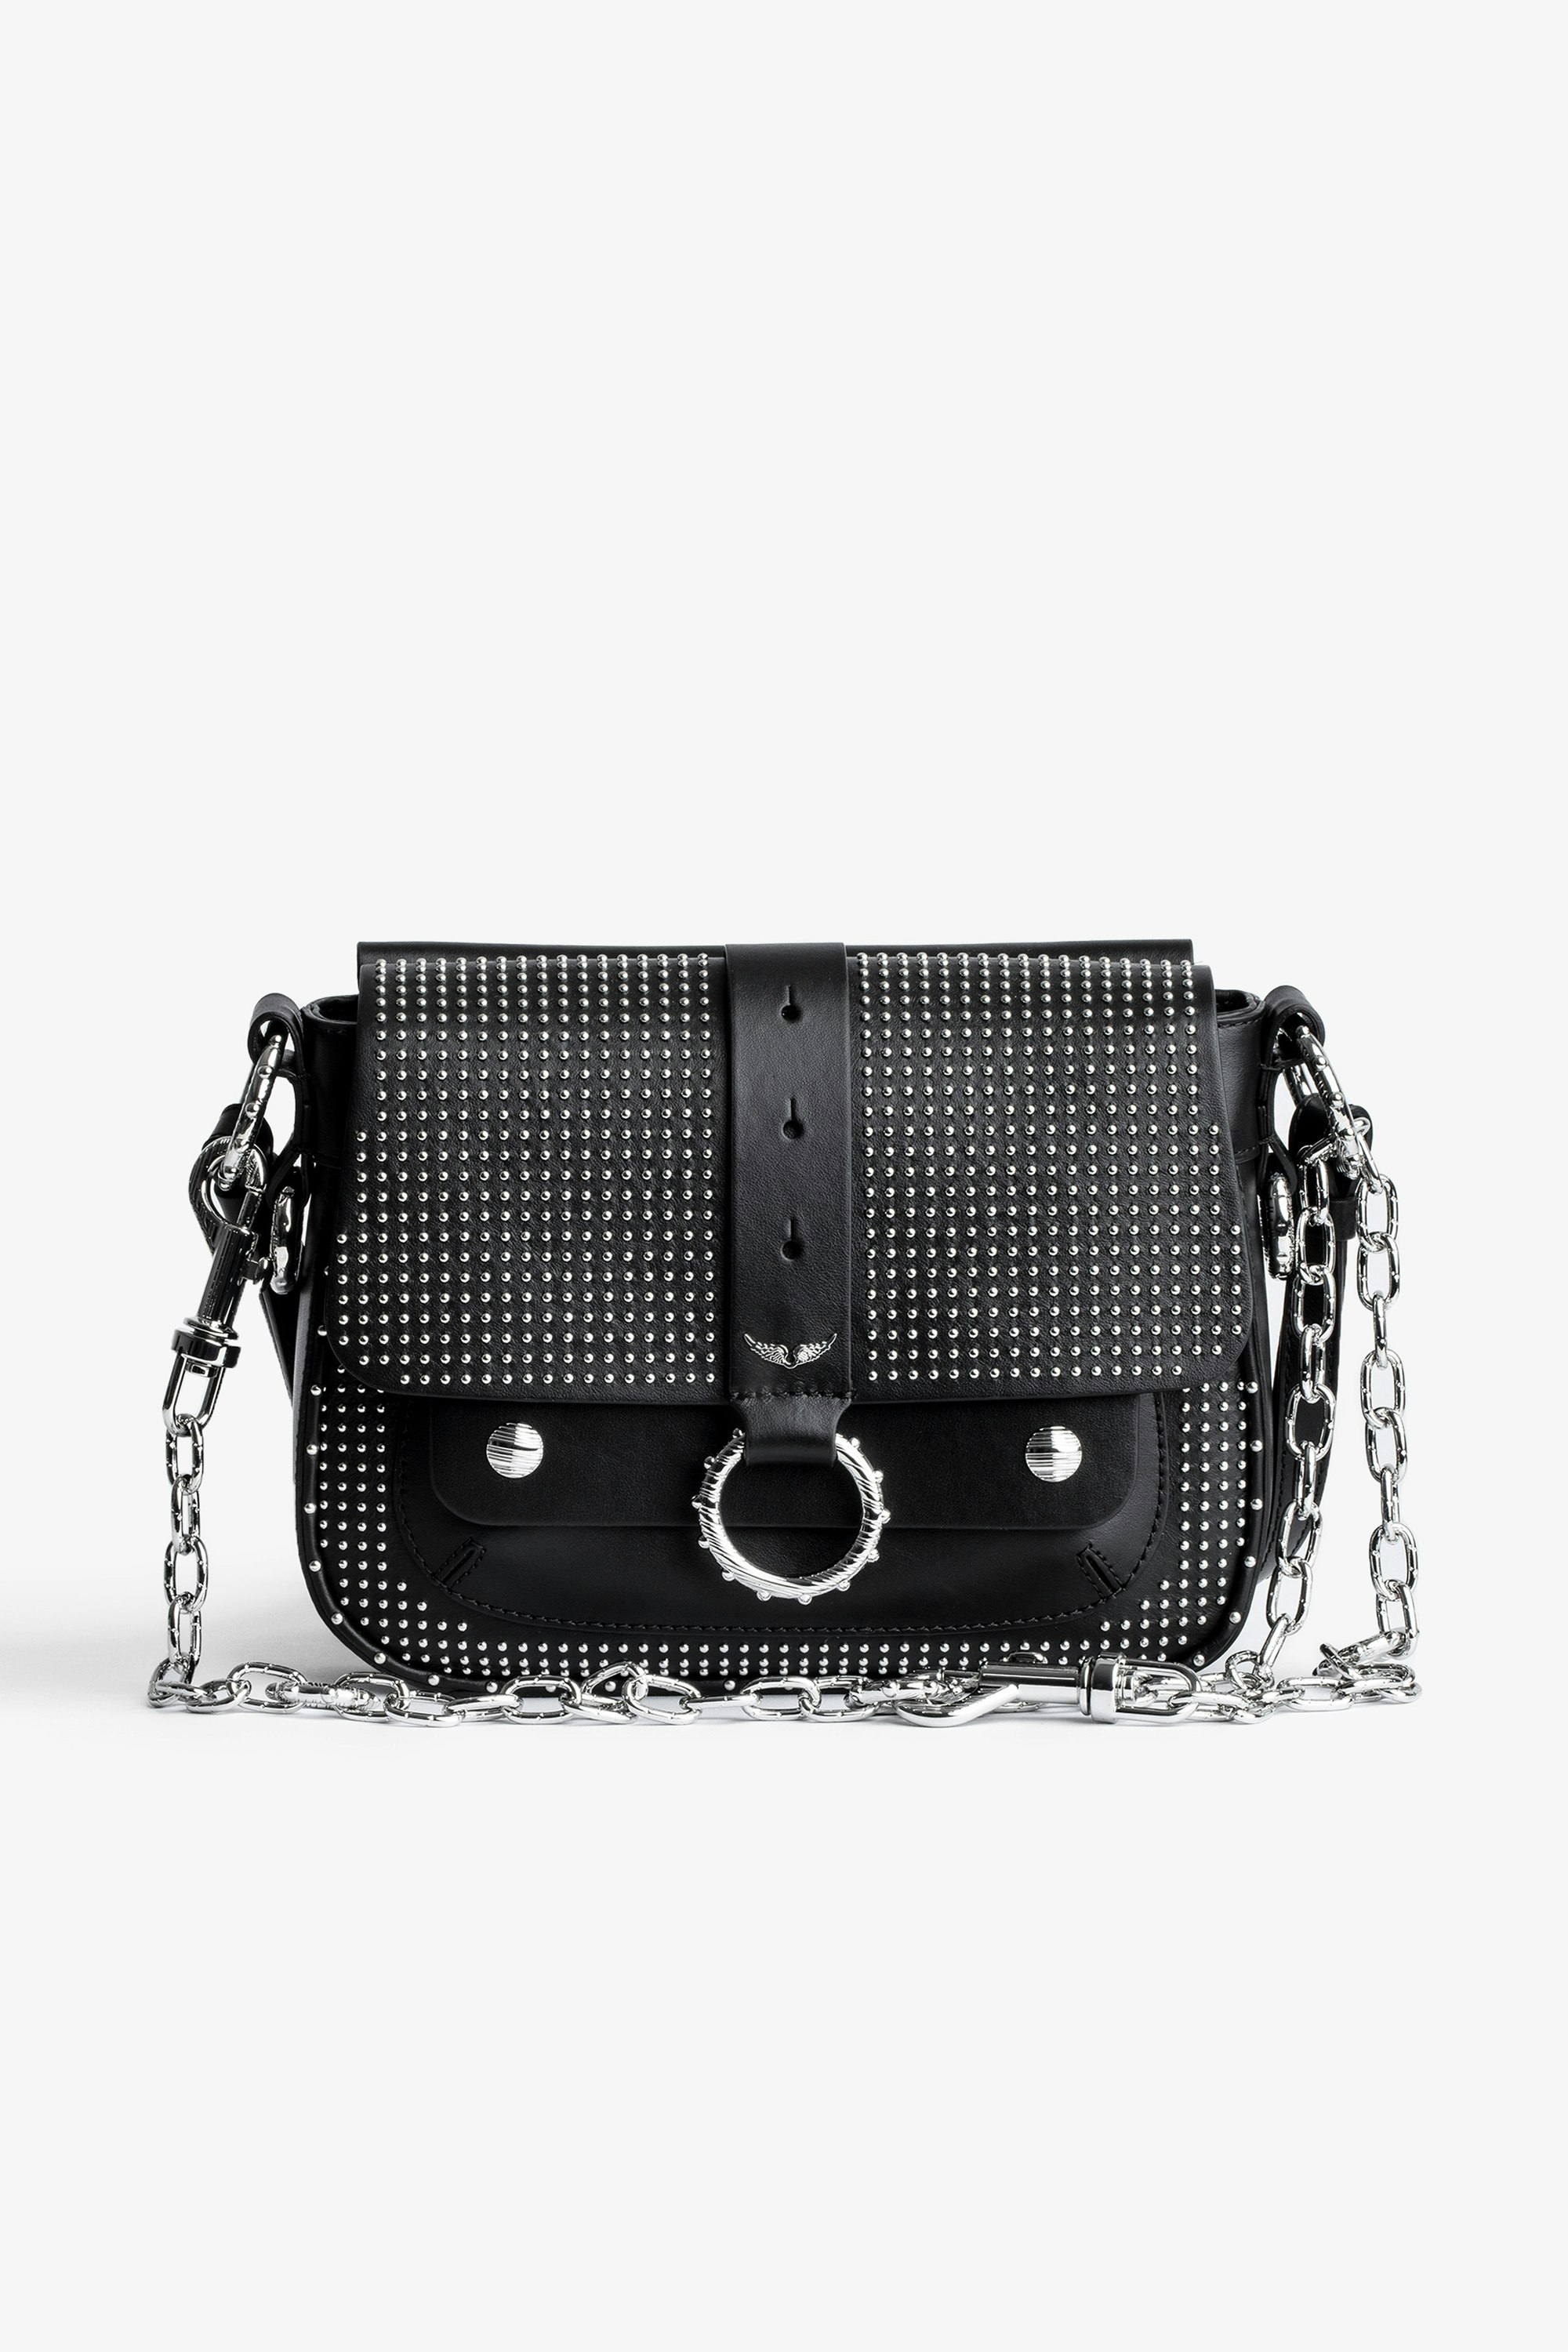 Kate バッグ Women’s black leather bag with flap, studs and adjustable shoulder strap